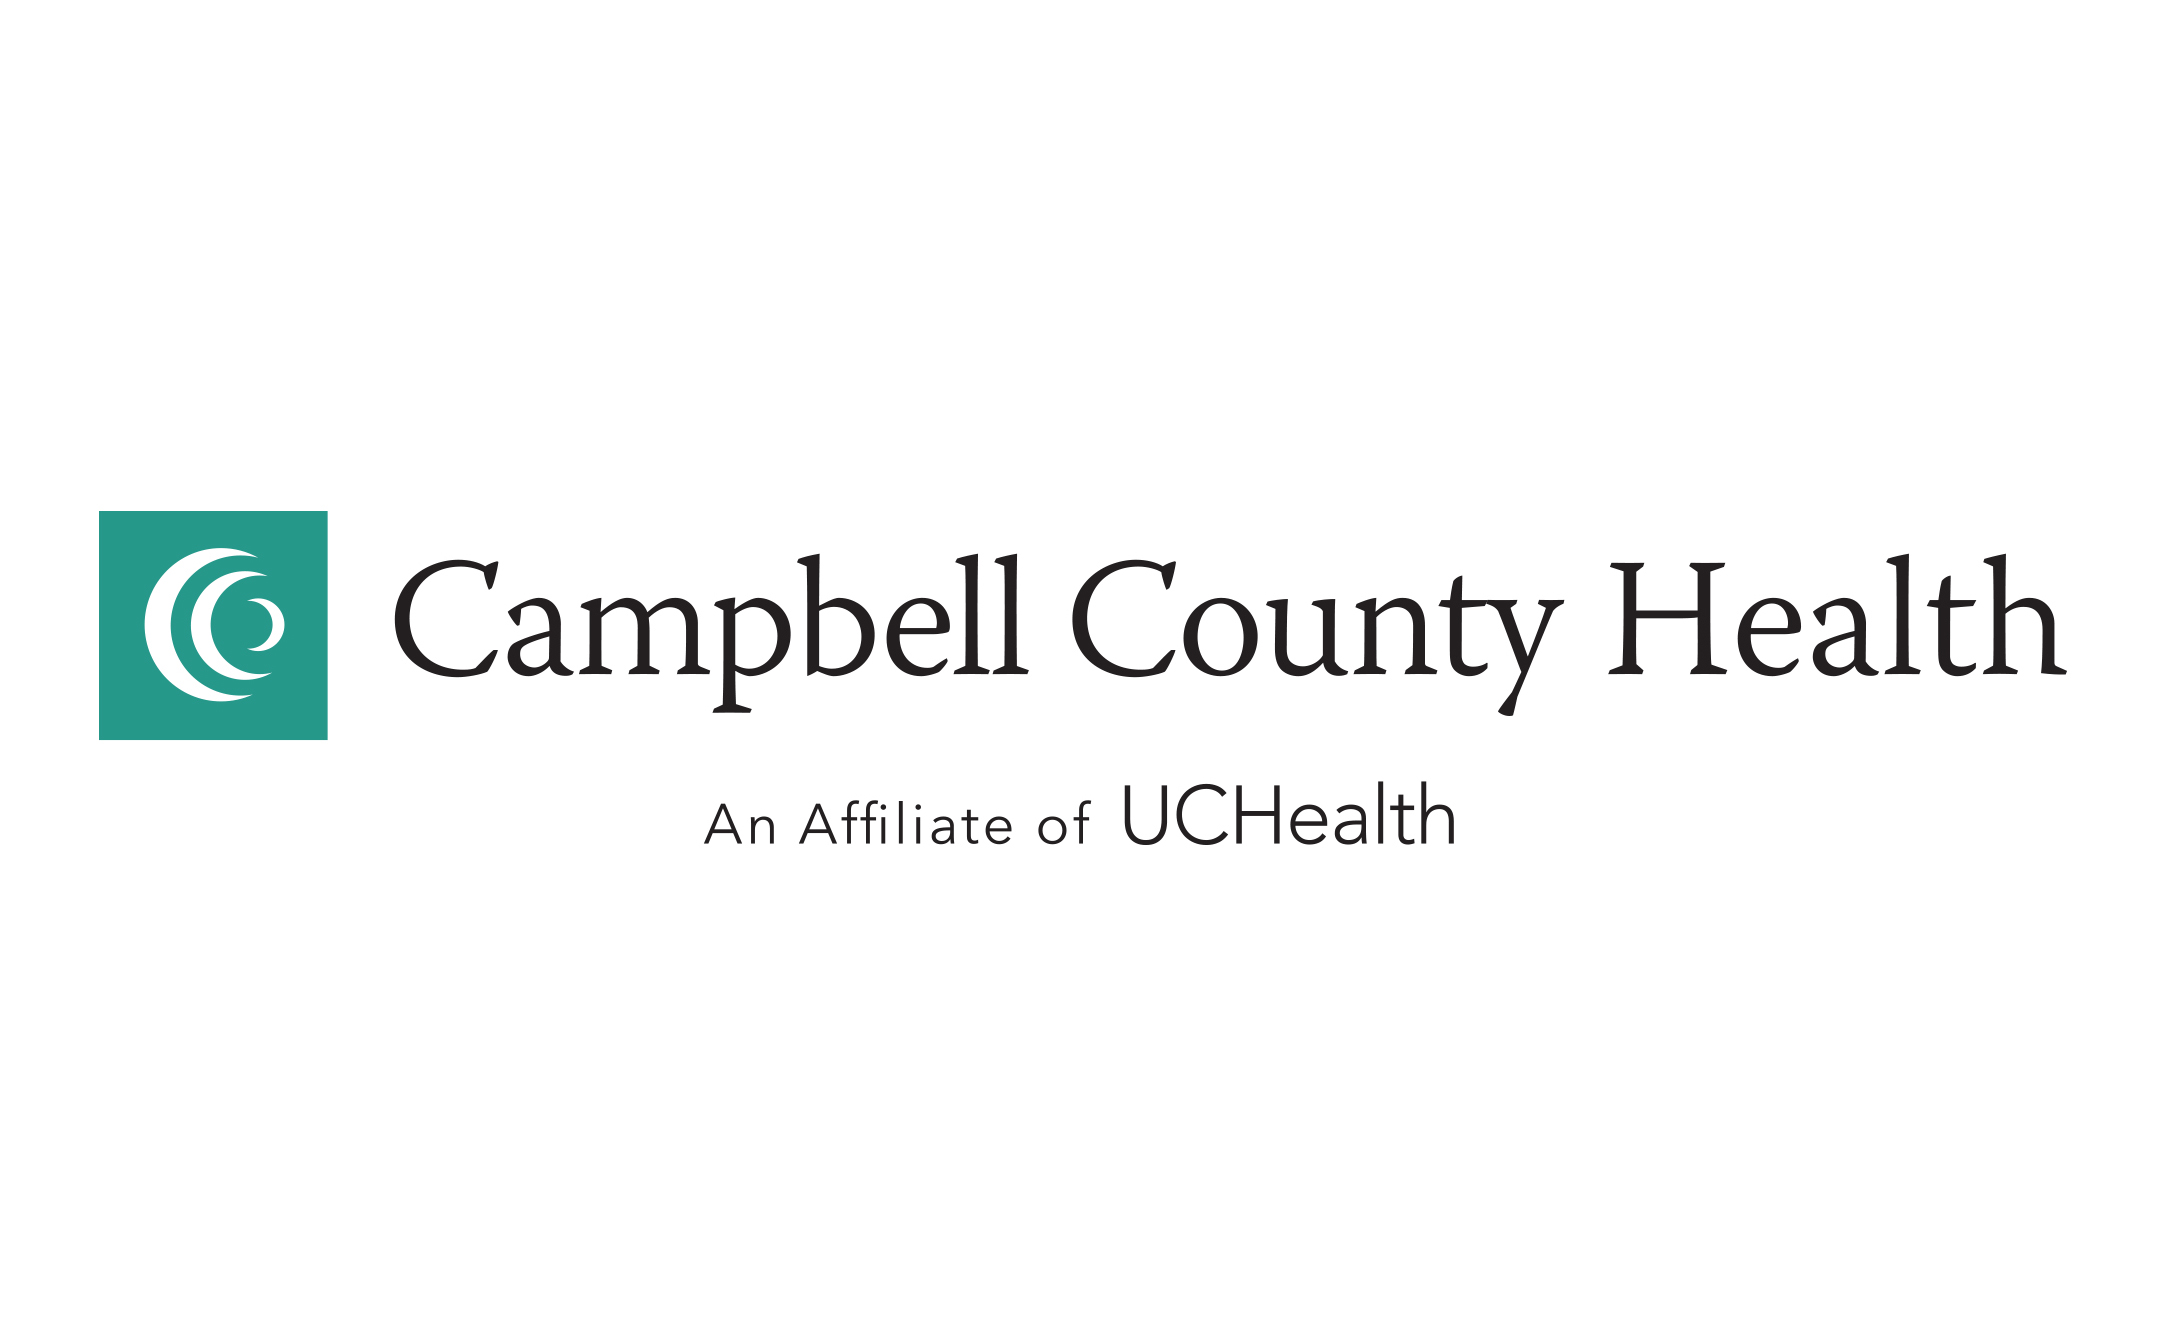 G. Campbell County Health (Tier 3)